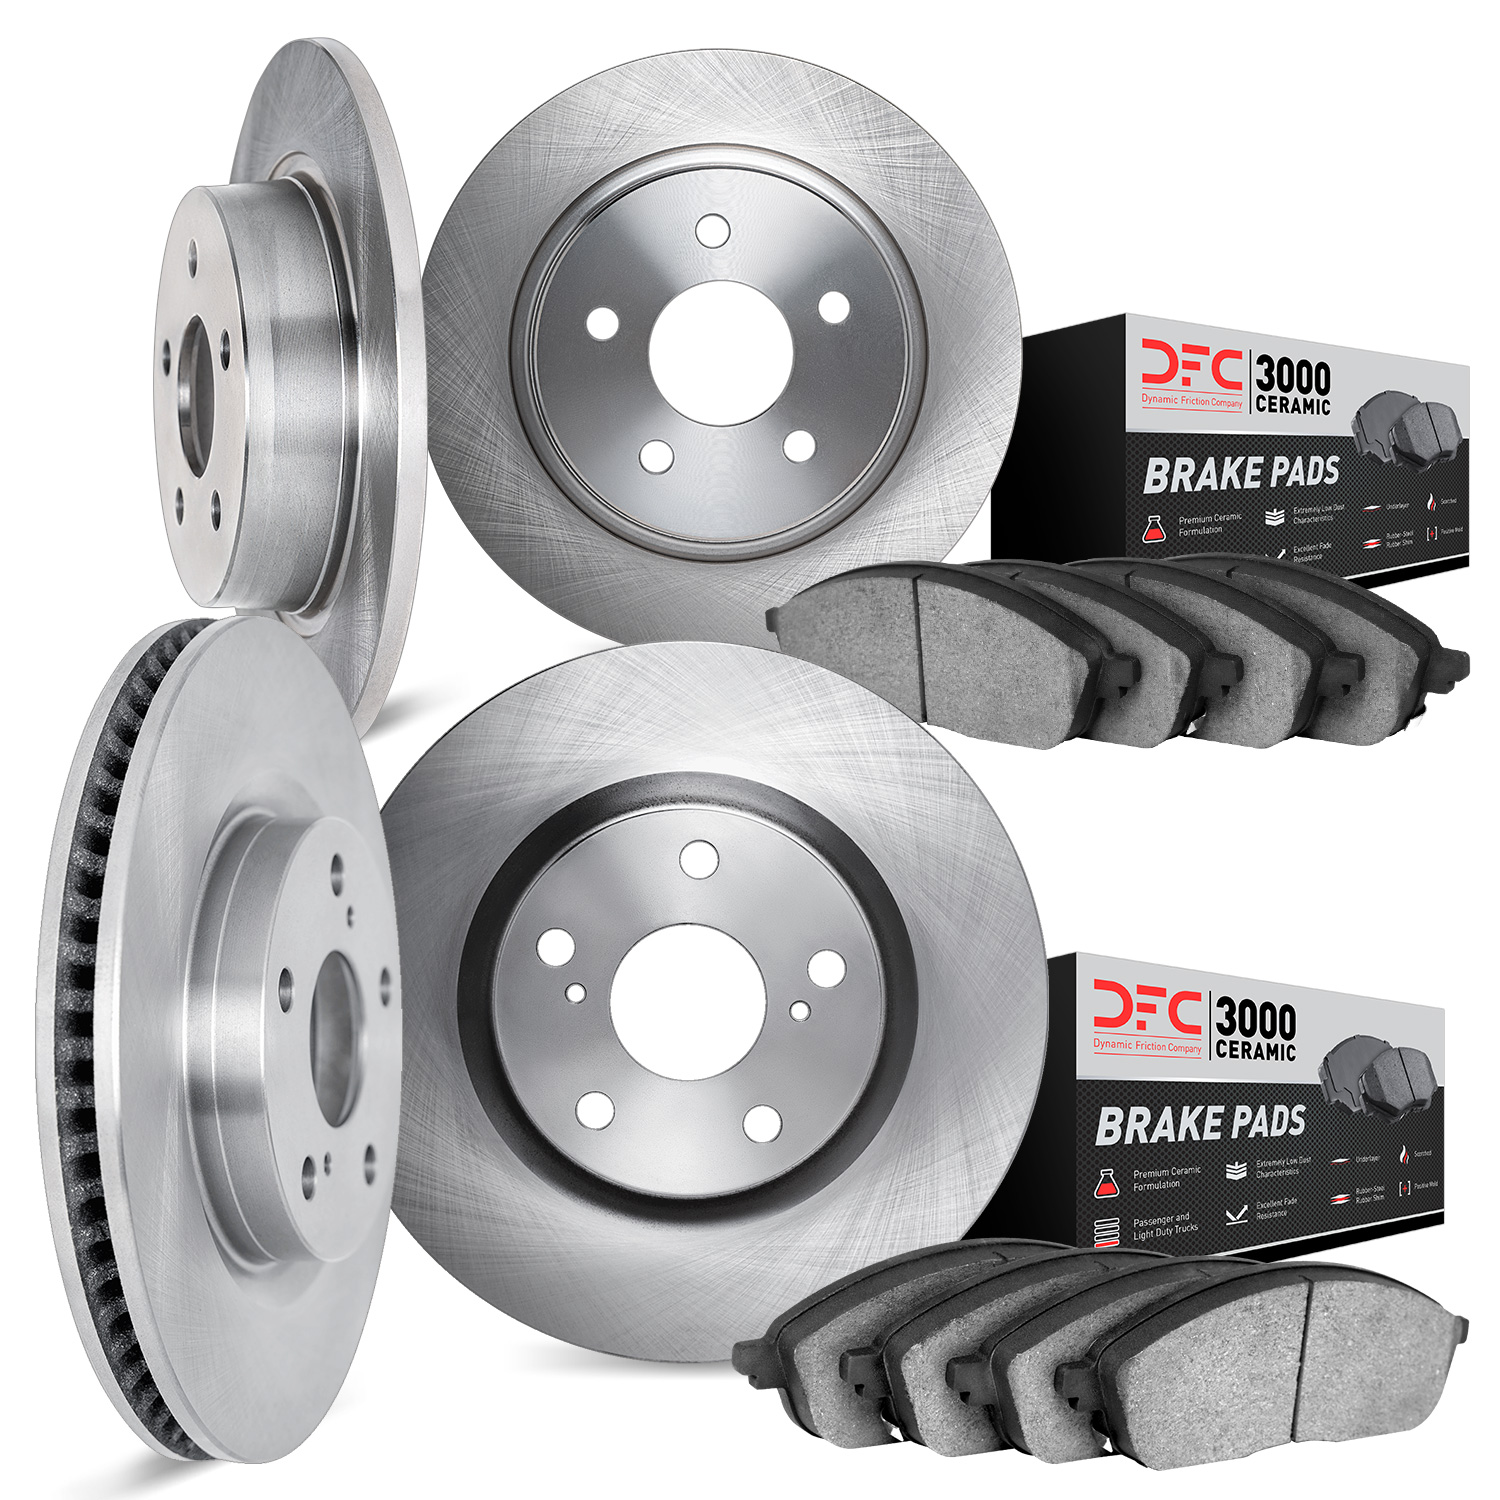 6304-76087 Brake Rotors with 3000-Series Ceramic Brake Pads Kit, 2006-2018 Lexus/Toyota/Scion, Position: Front and Rear